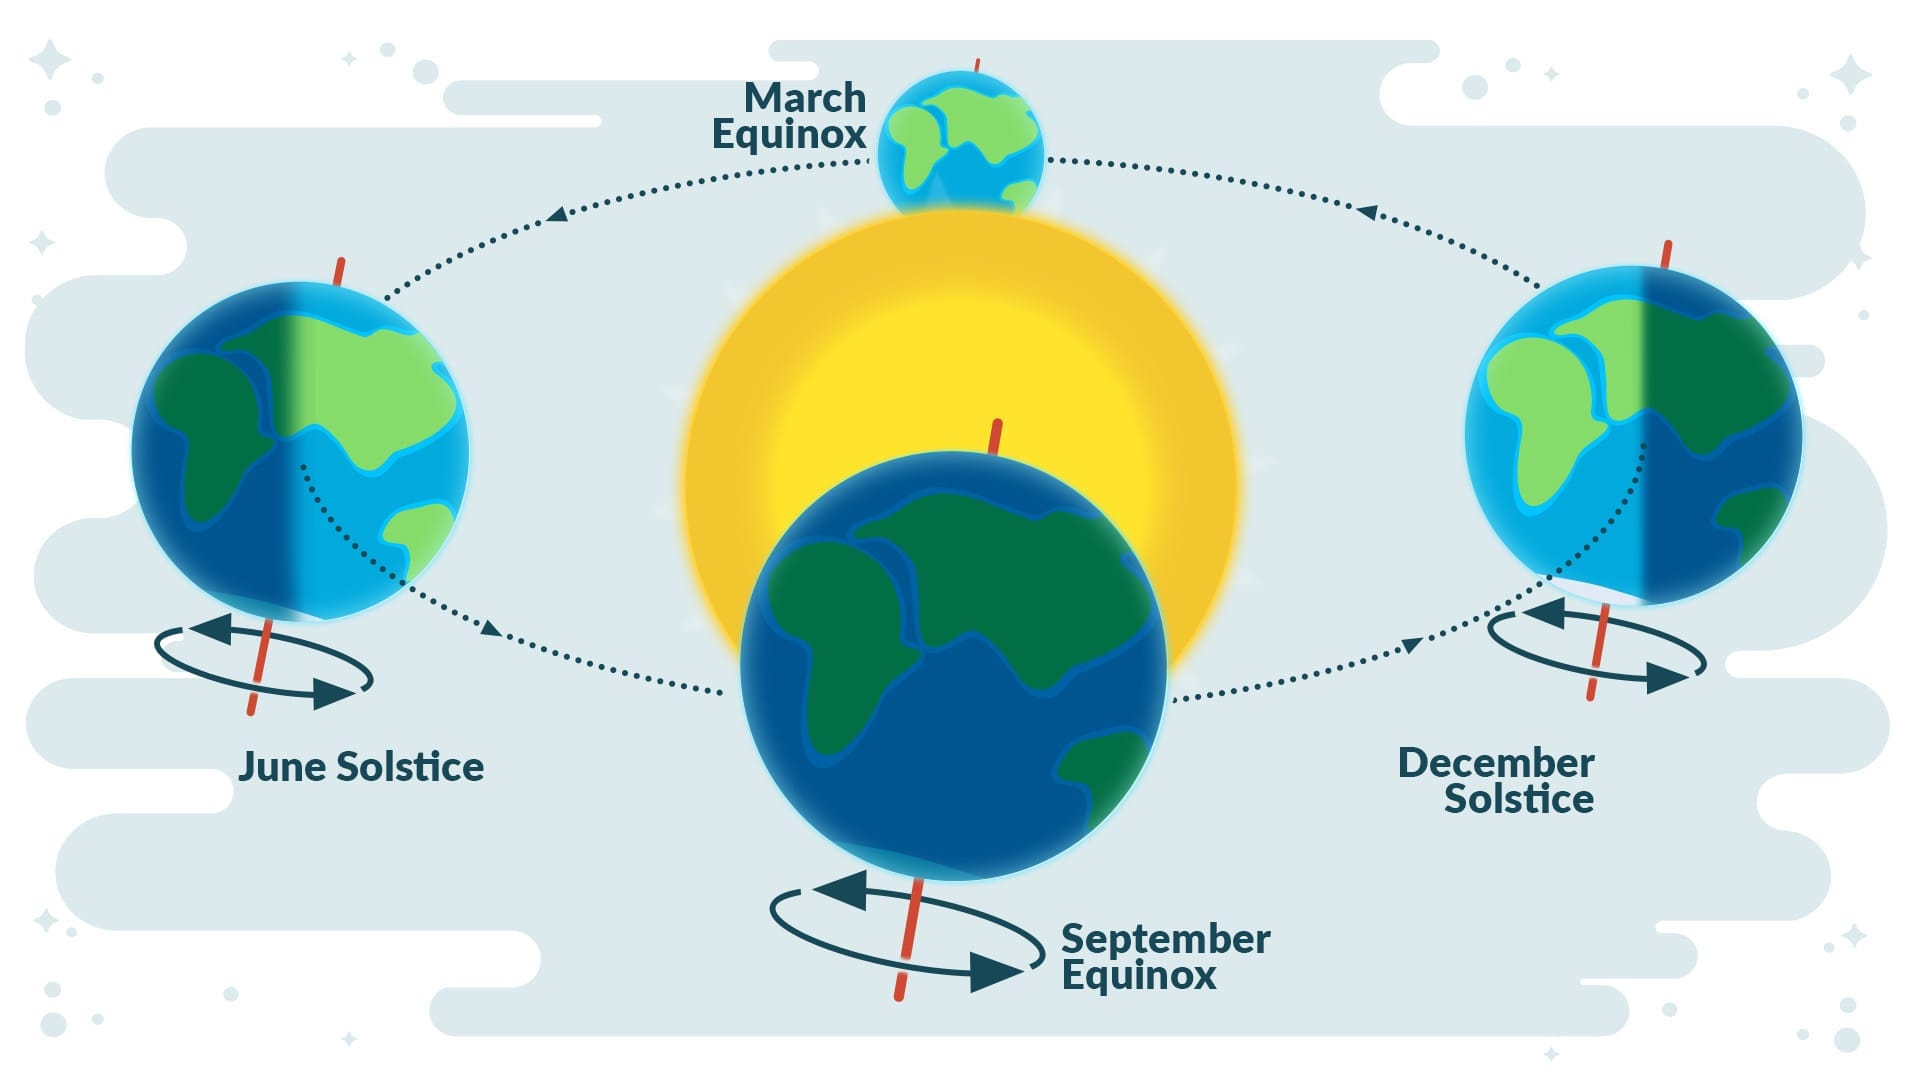 Equinoxes and Solstices